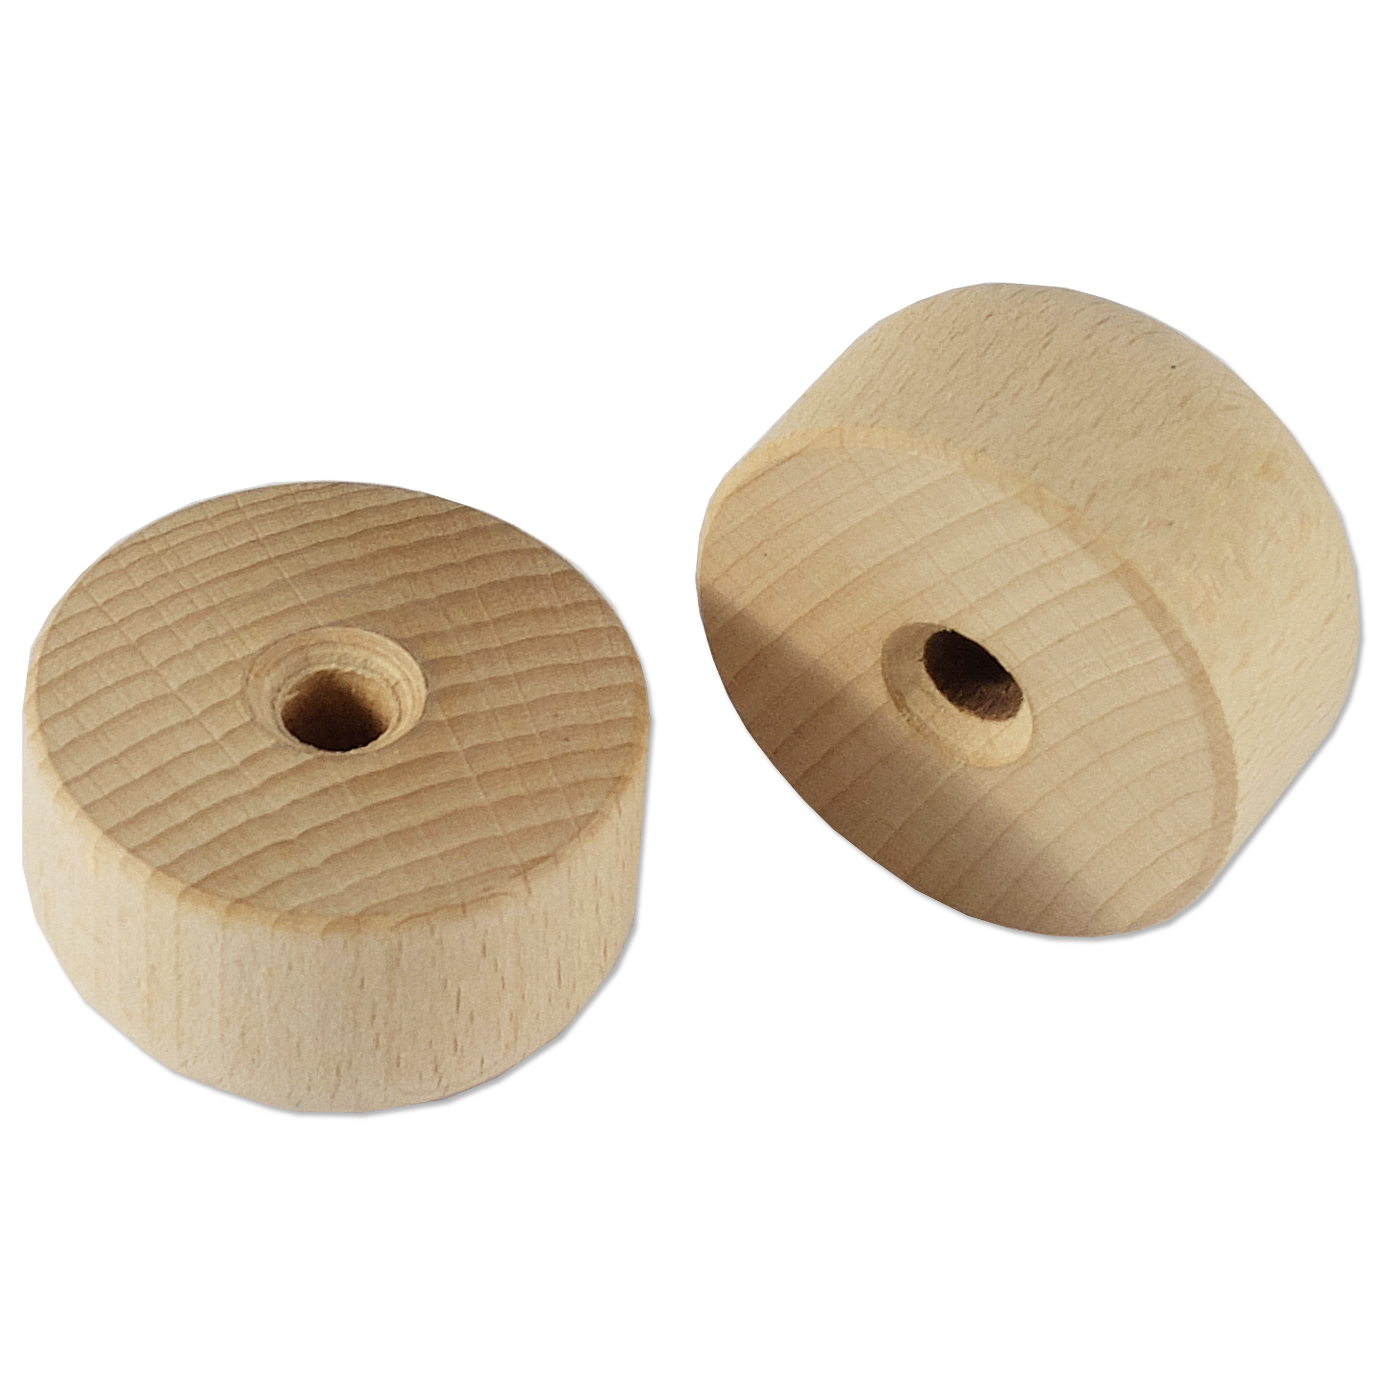 Solid wood wheels for toys